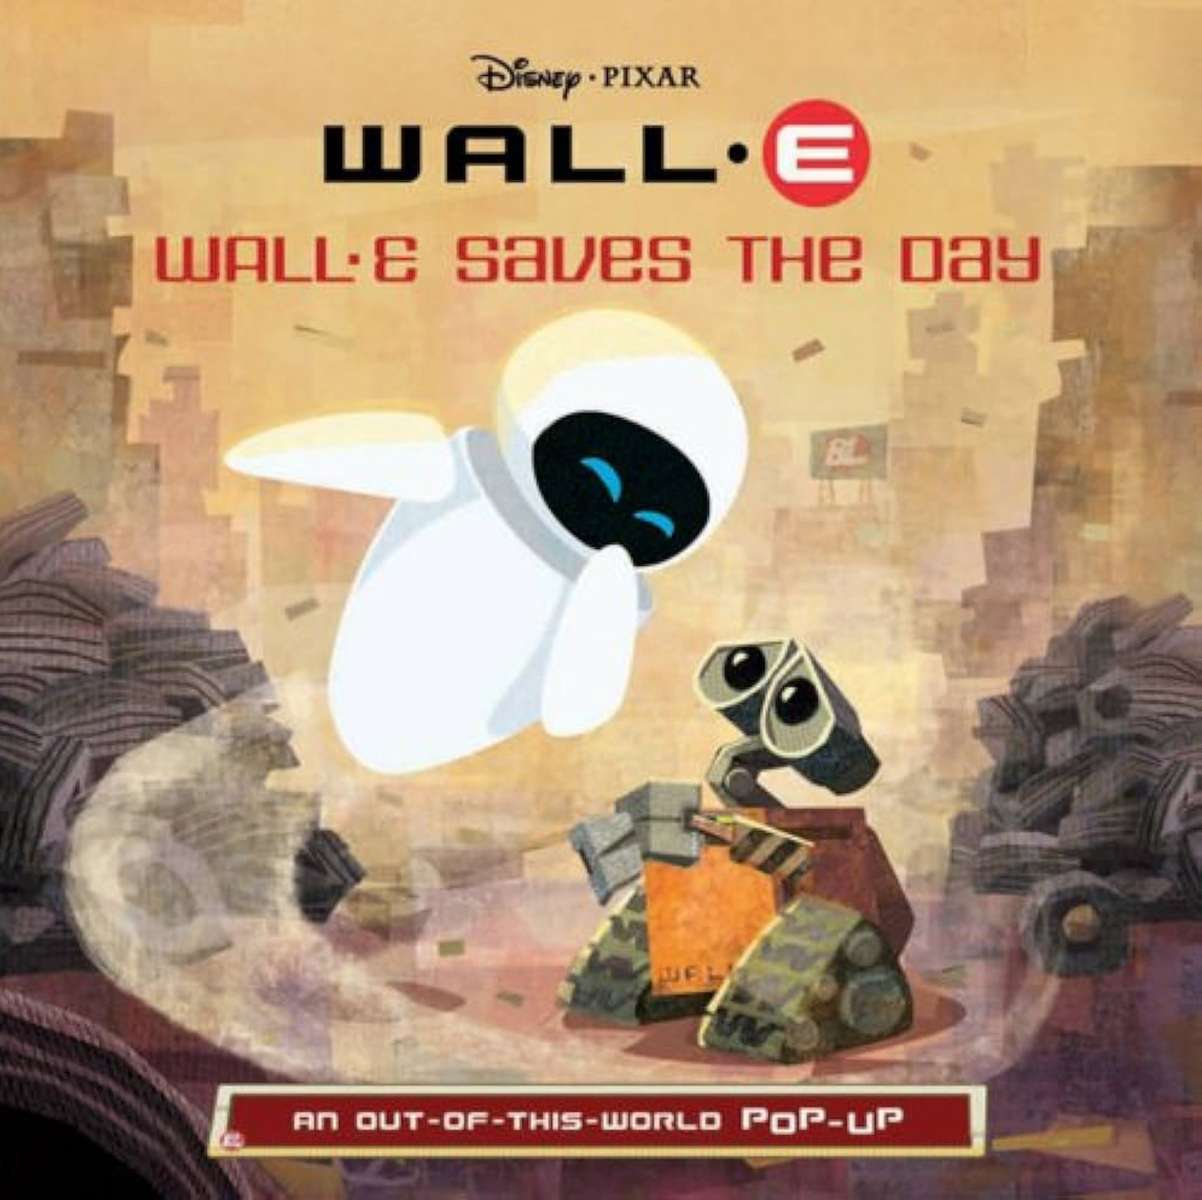 WALL-E Saves the Day online puzzle